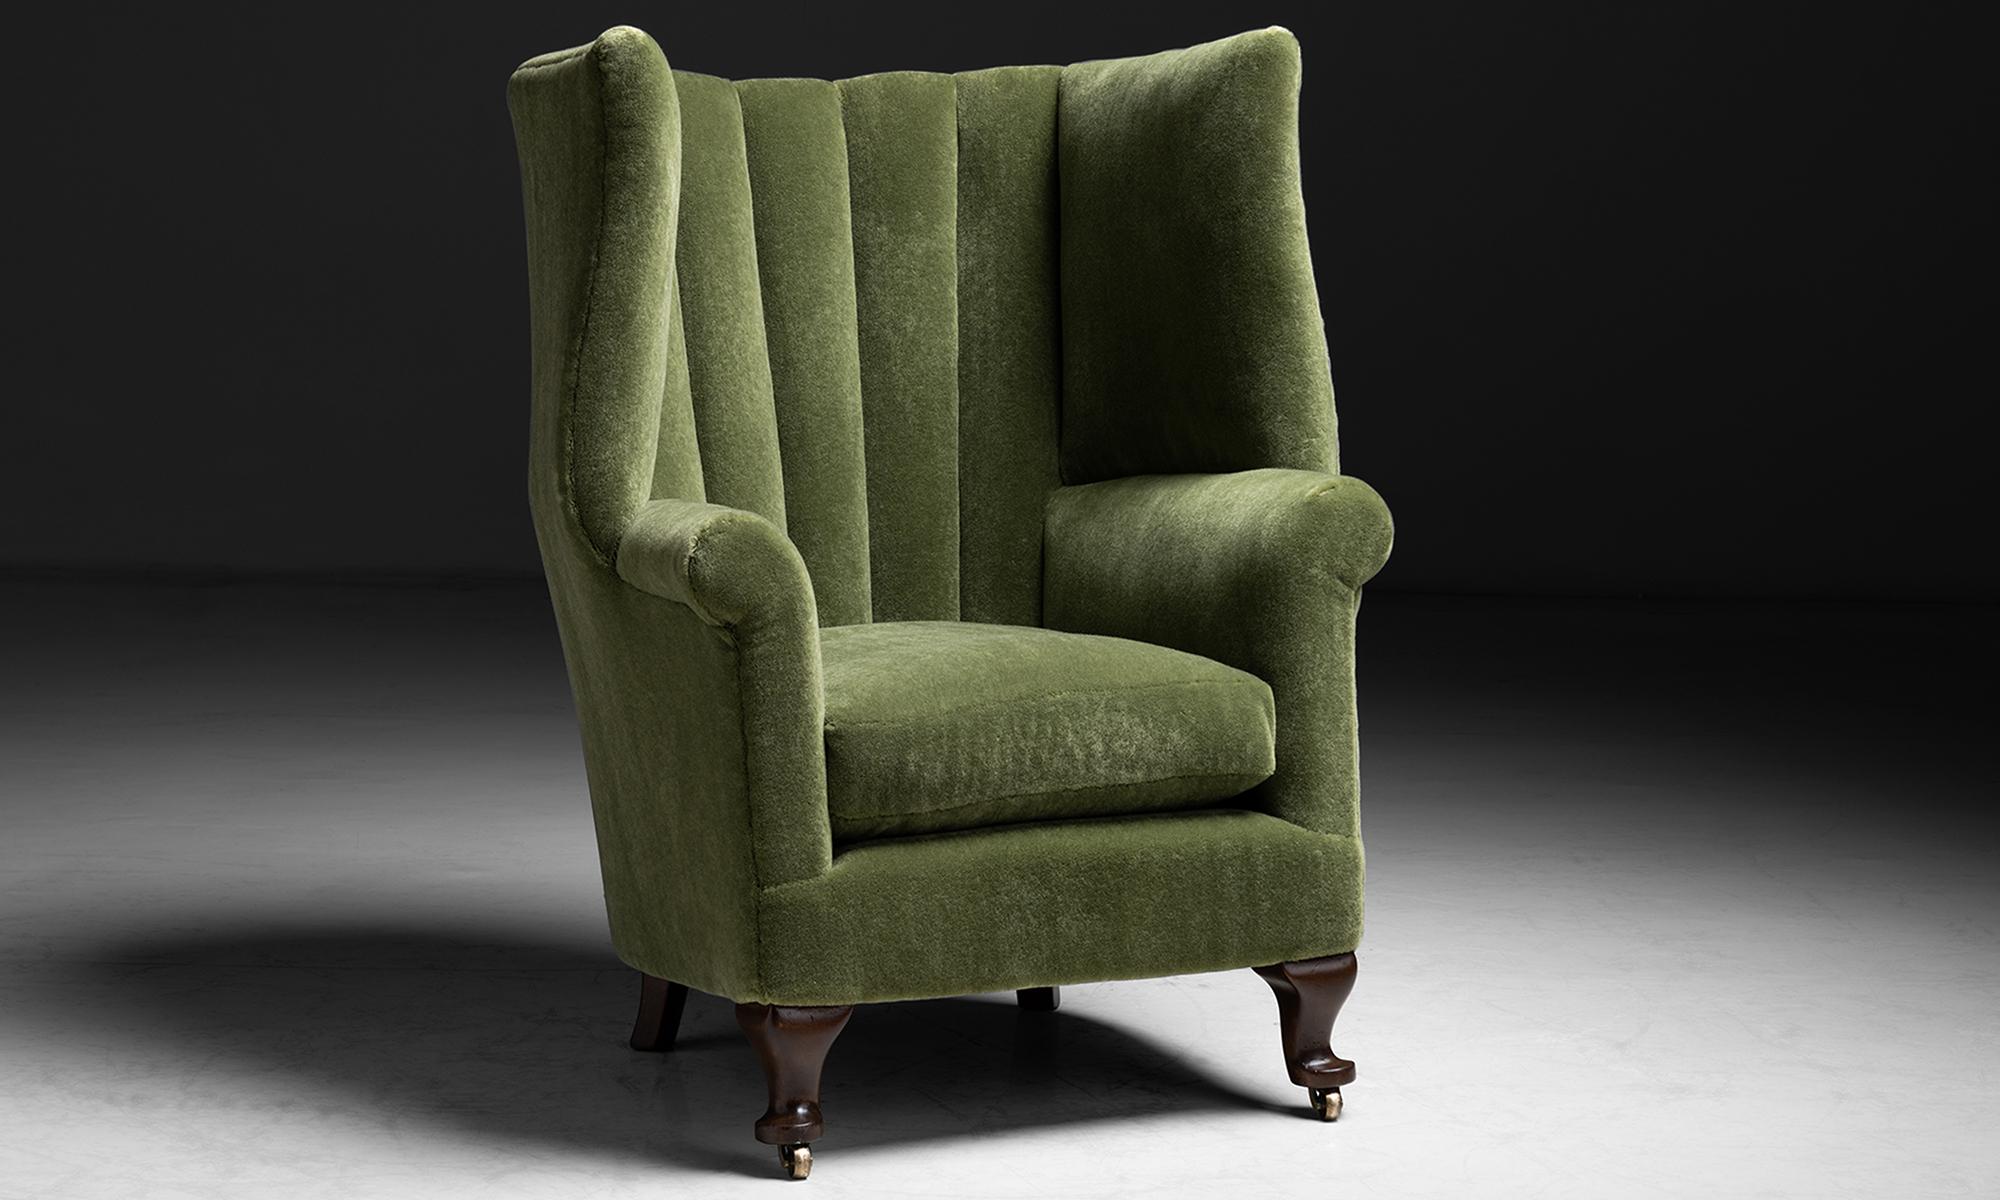 Barrel Back Armchair in Teddy Mohair by Pierre Frey, England circa 1850

Newly upholstered with cabriole mahogany legs on original brass casters.

Measures: 33”W x 33”D x 43”H x 20”seat.